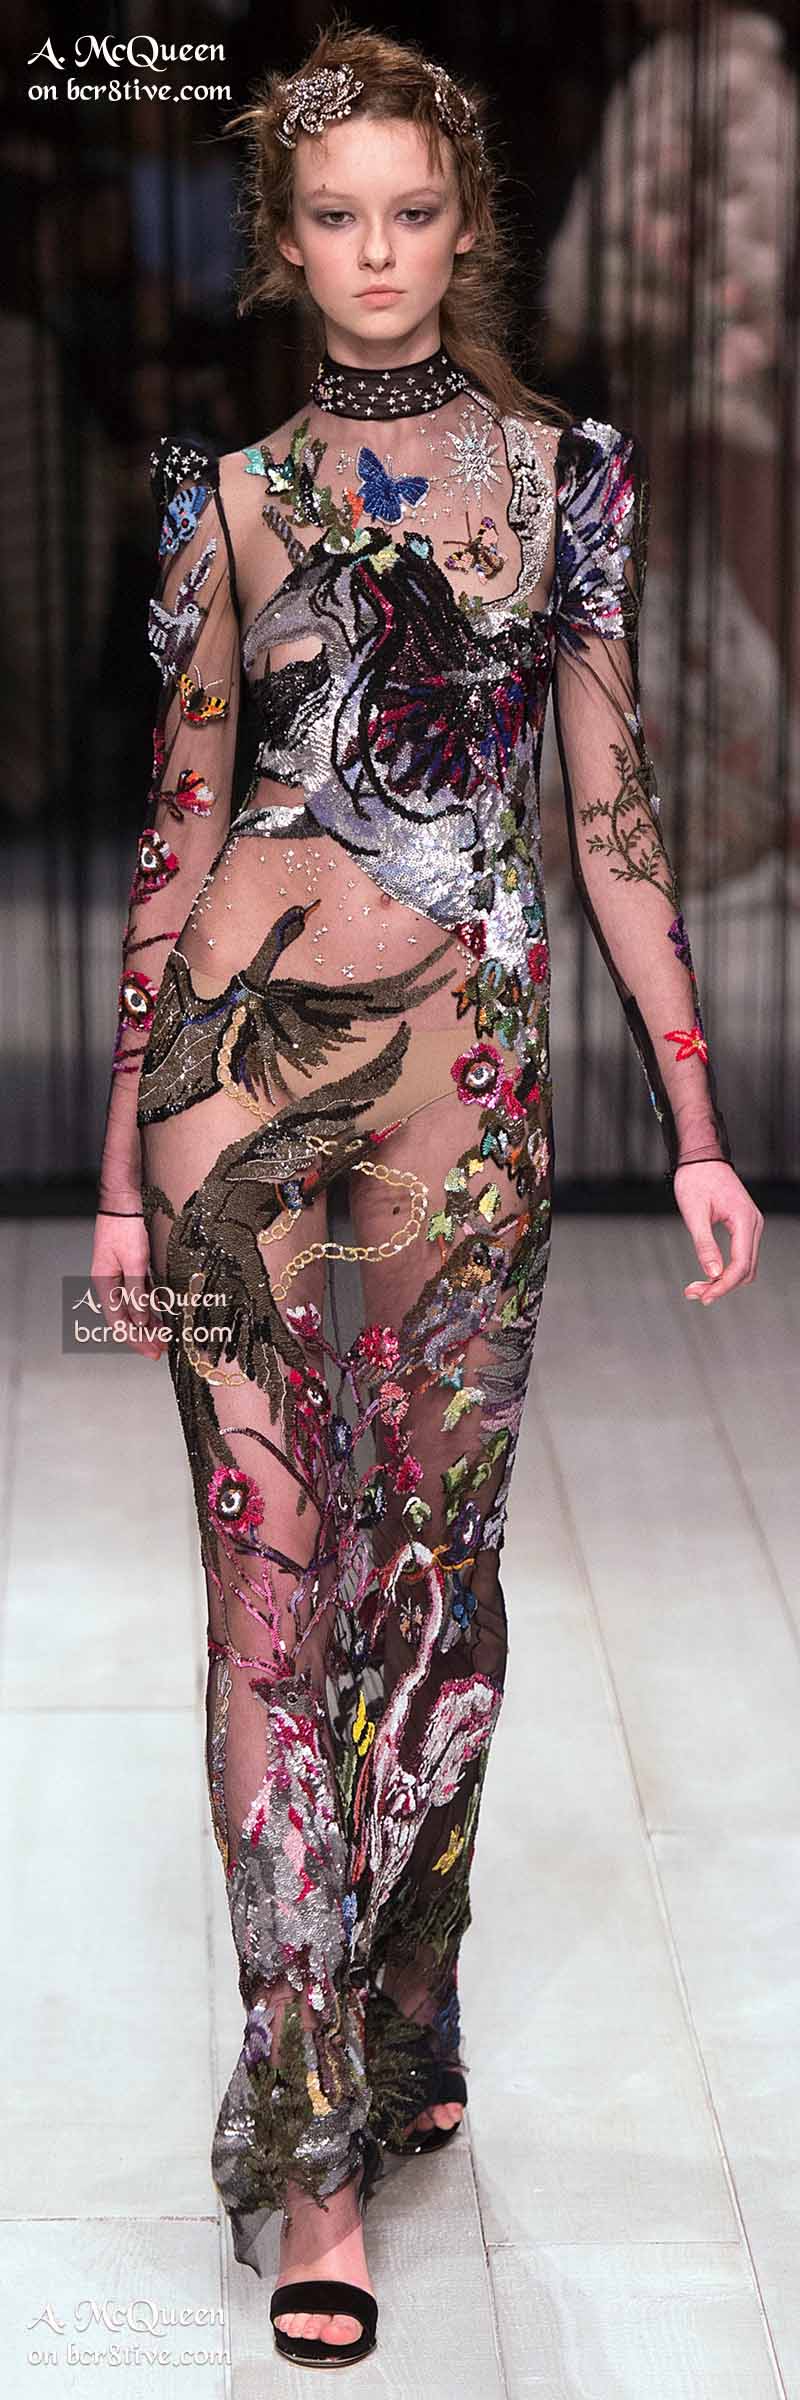 Embroidered Evening Gown - The Best of Alexander McQueen 2016